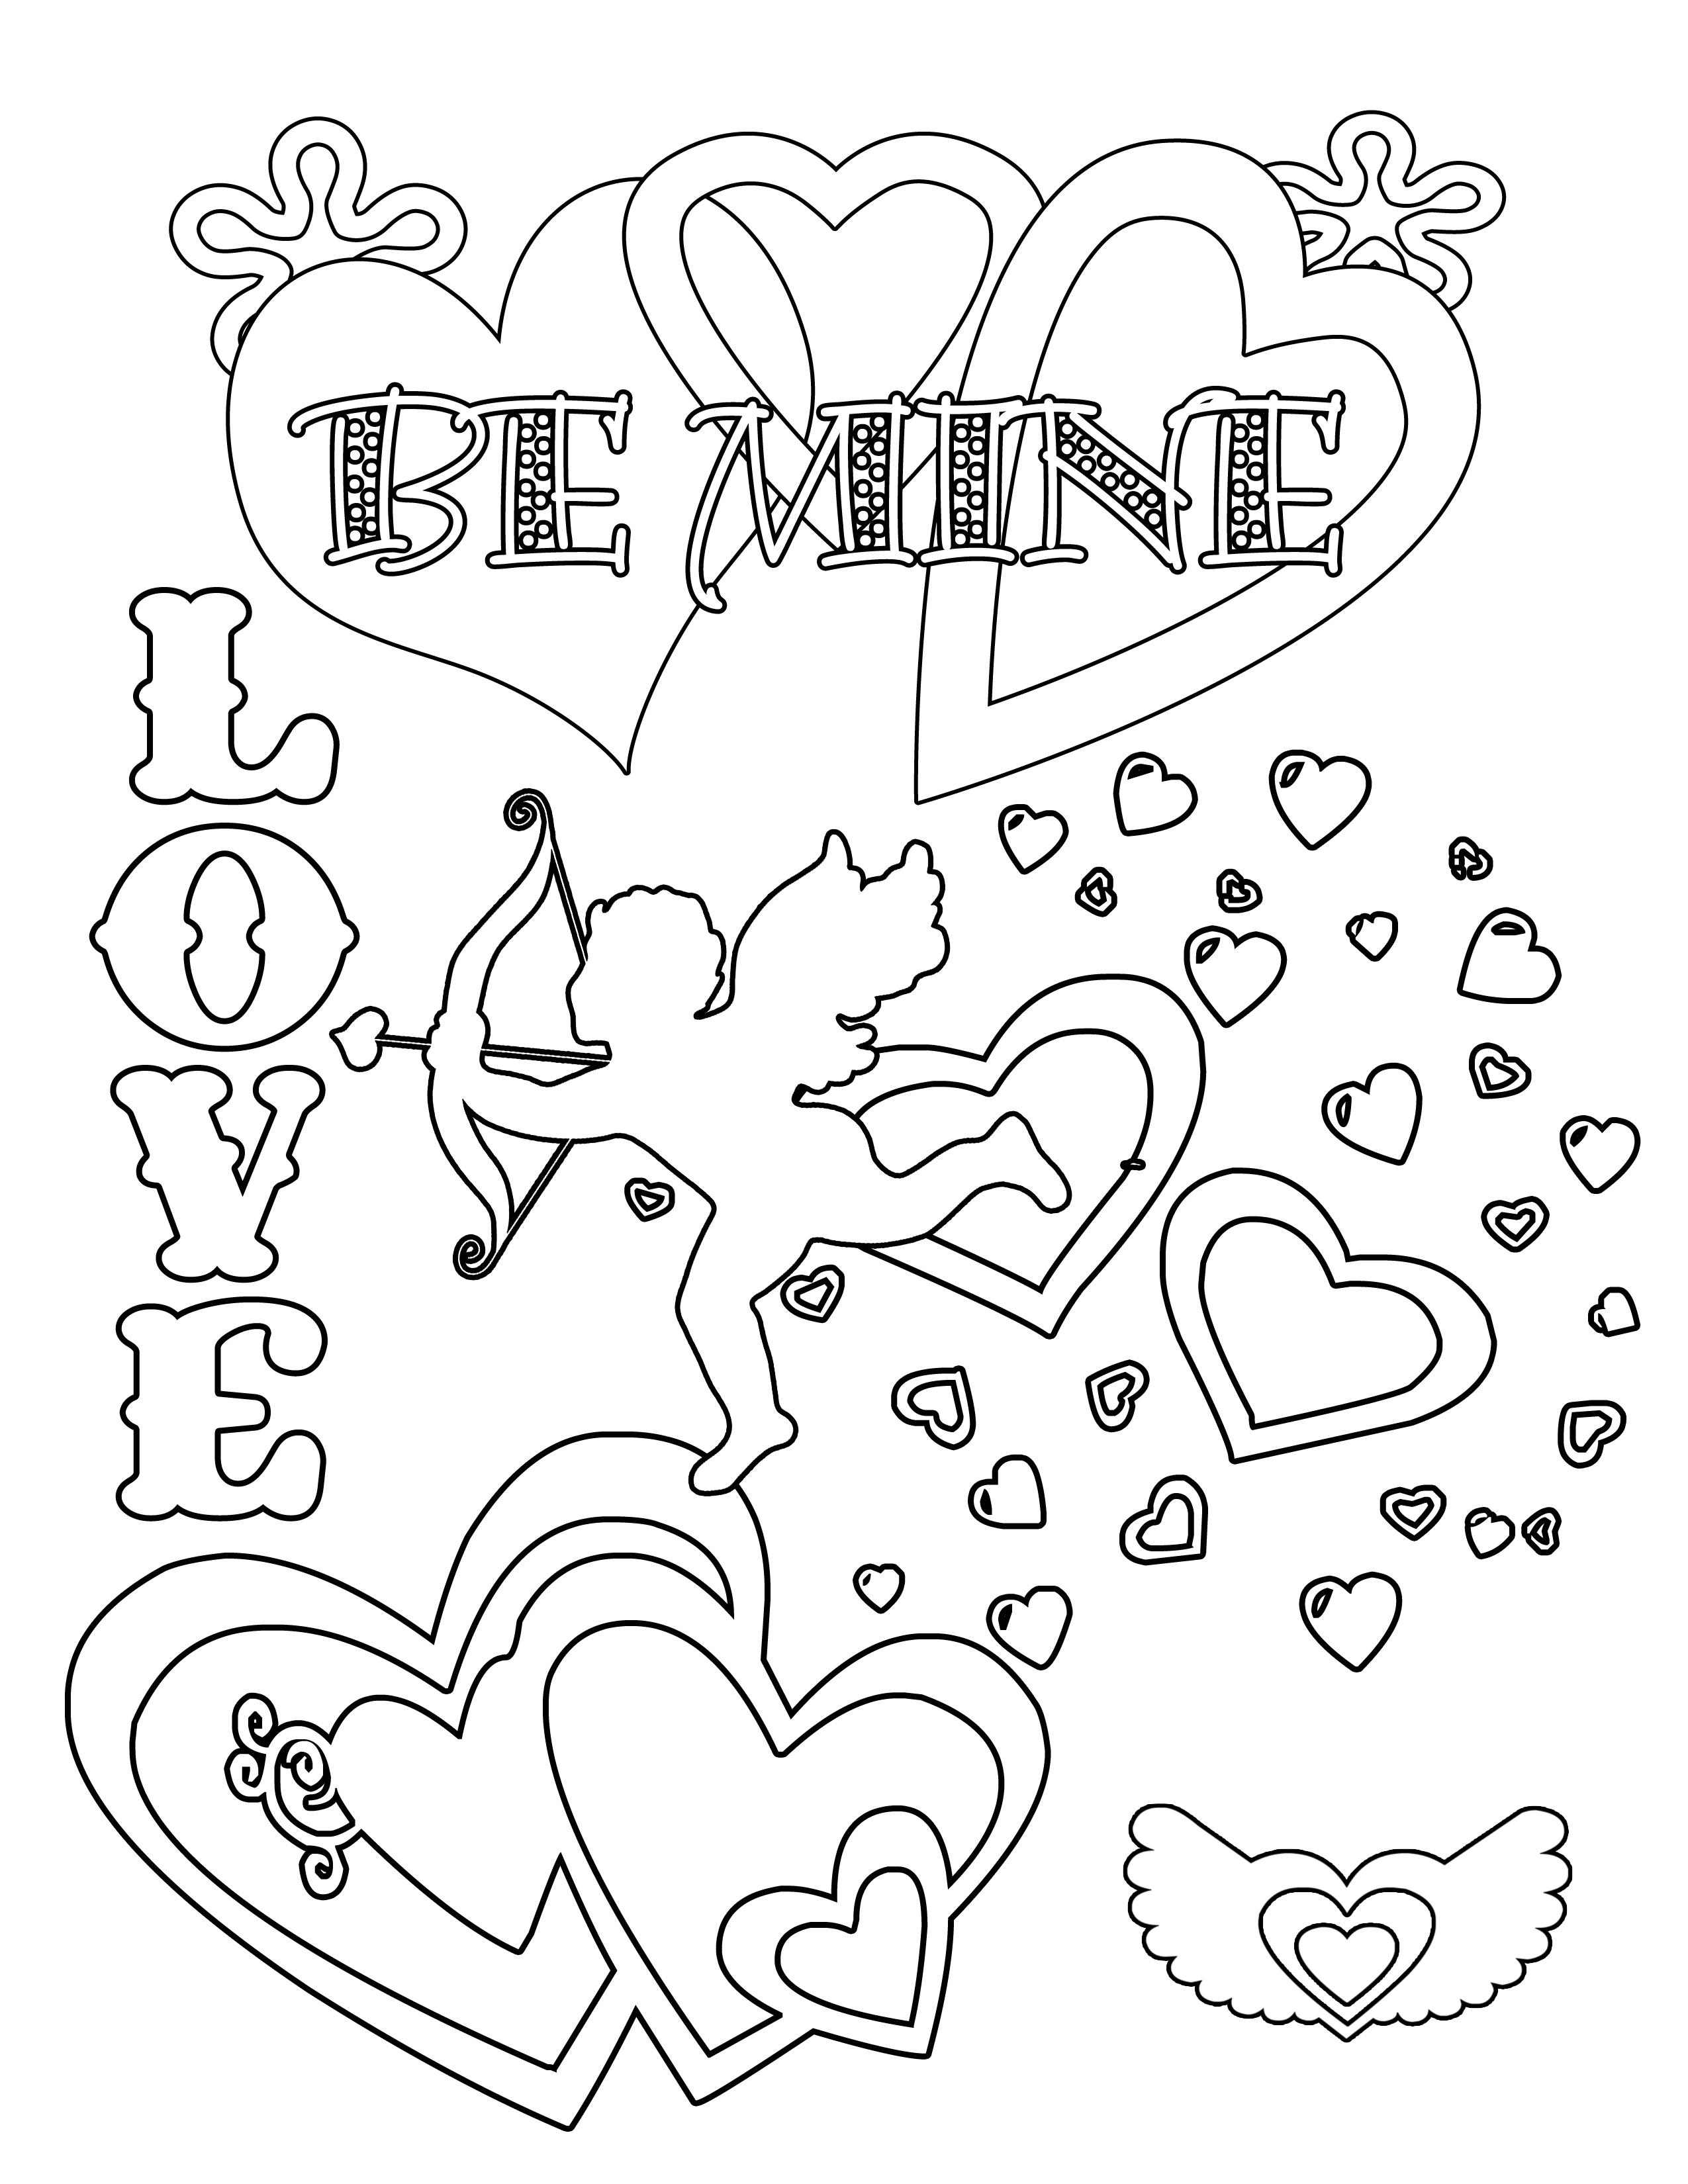 Valentine Coloring Pages Best Coloring Pages For Kids Effy Moom Free Coloring Picture wallpaper give a chance to color on the wall without getting in trouble! Fill the walls of your home or office with stress-relieving [effymoom.blogspot.com]